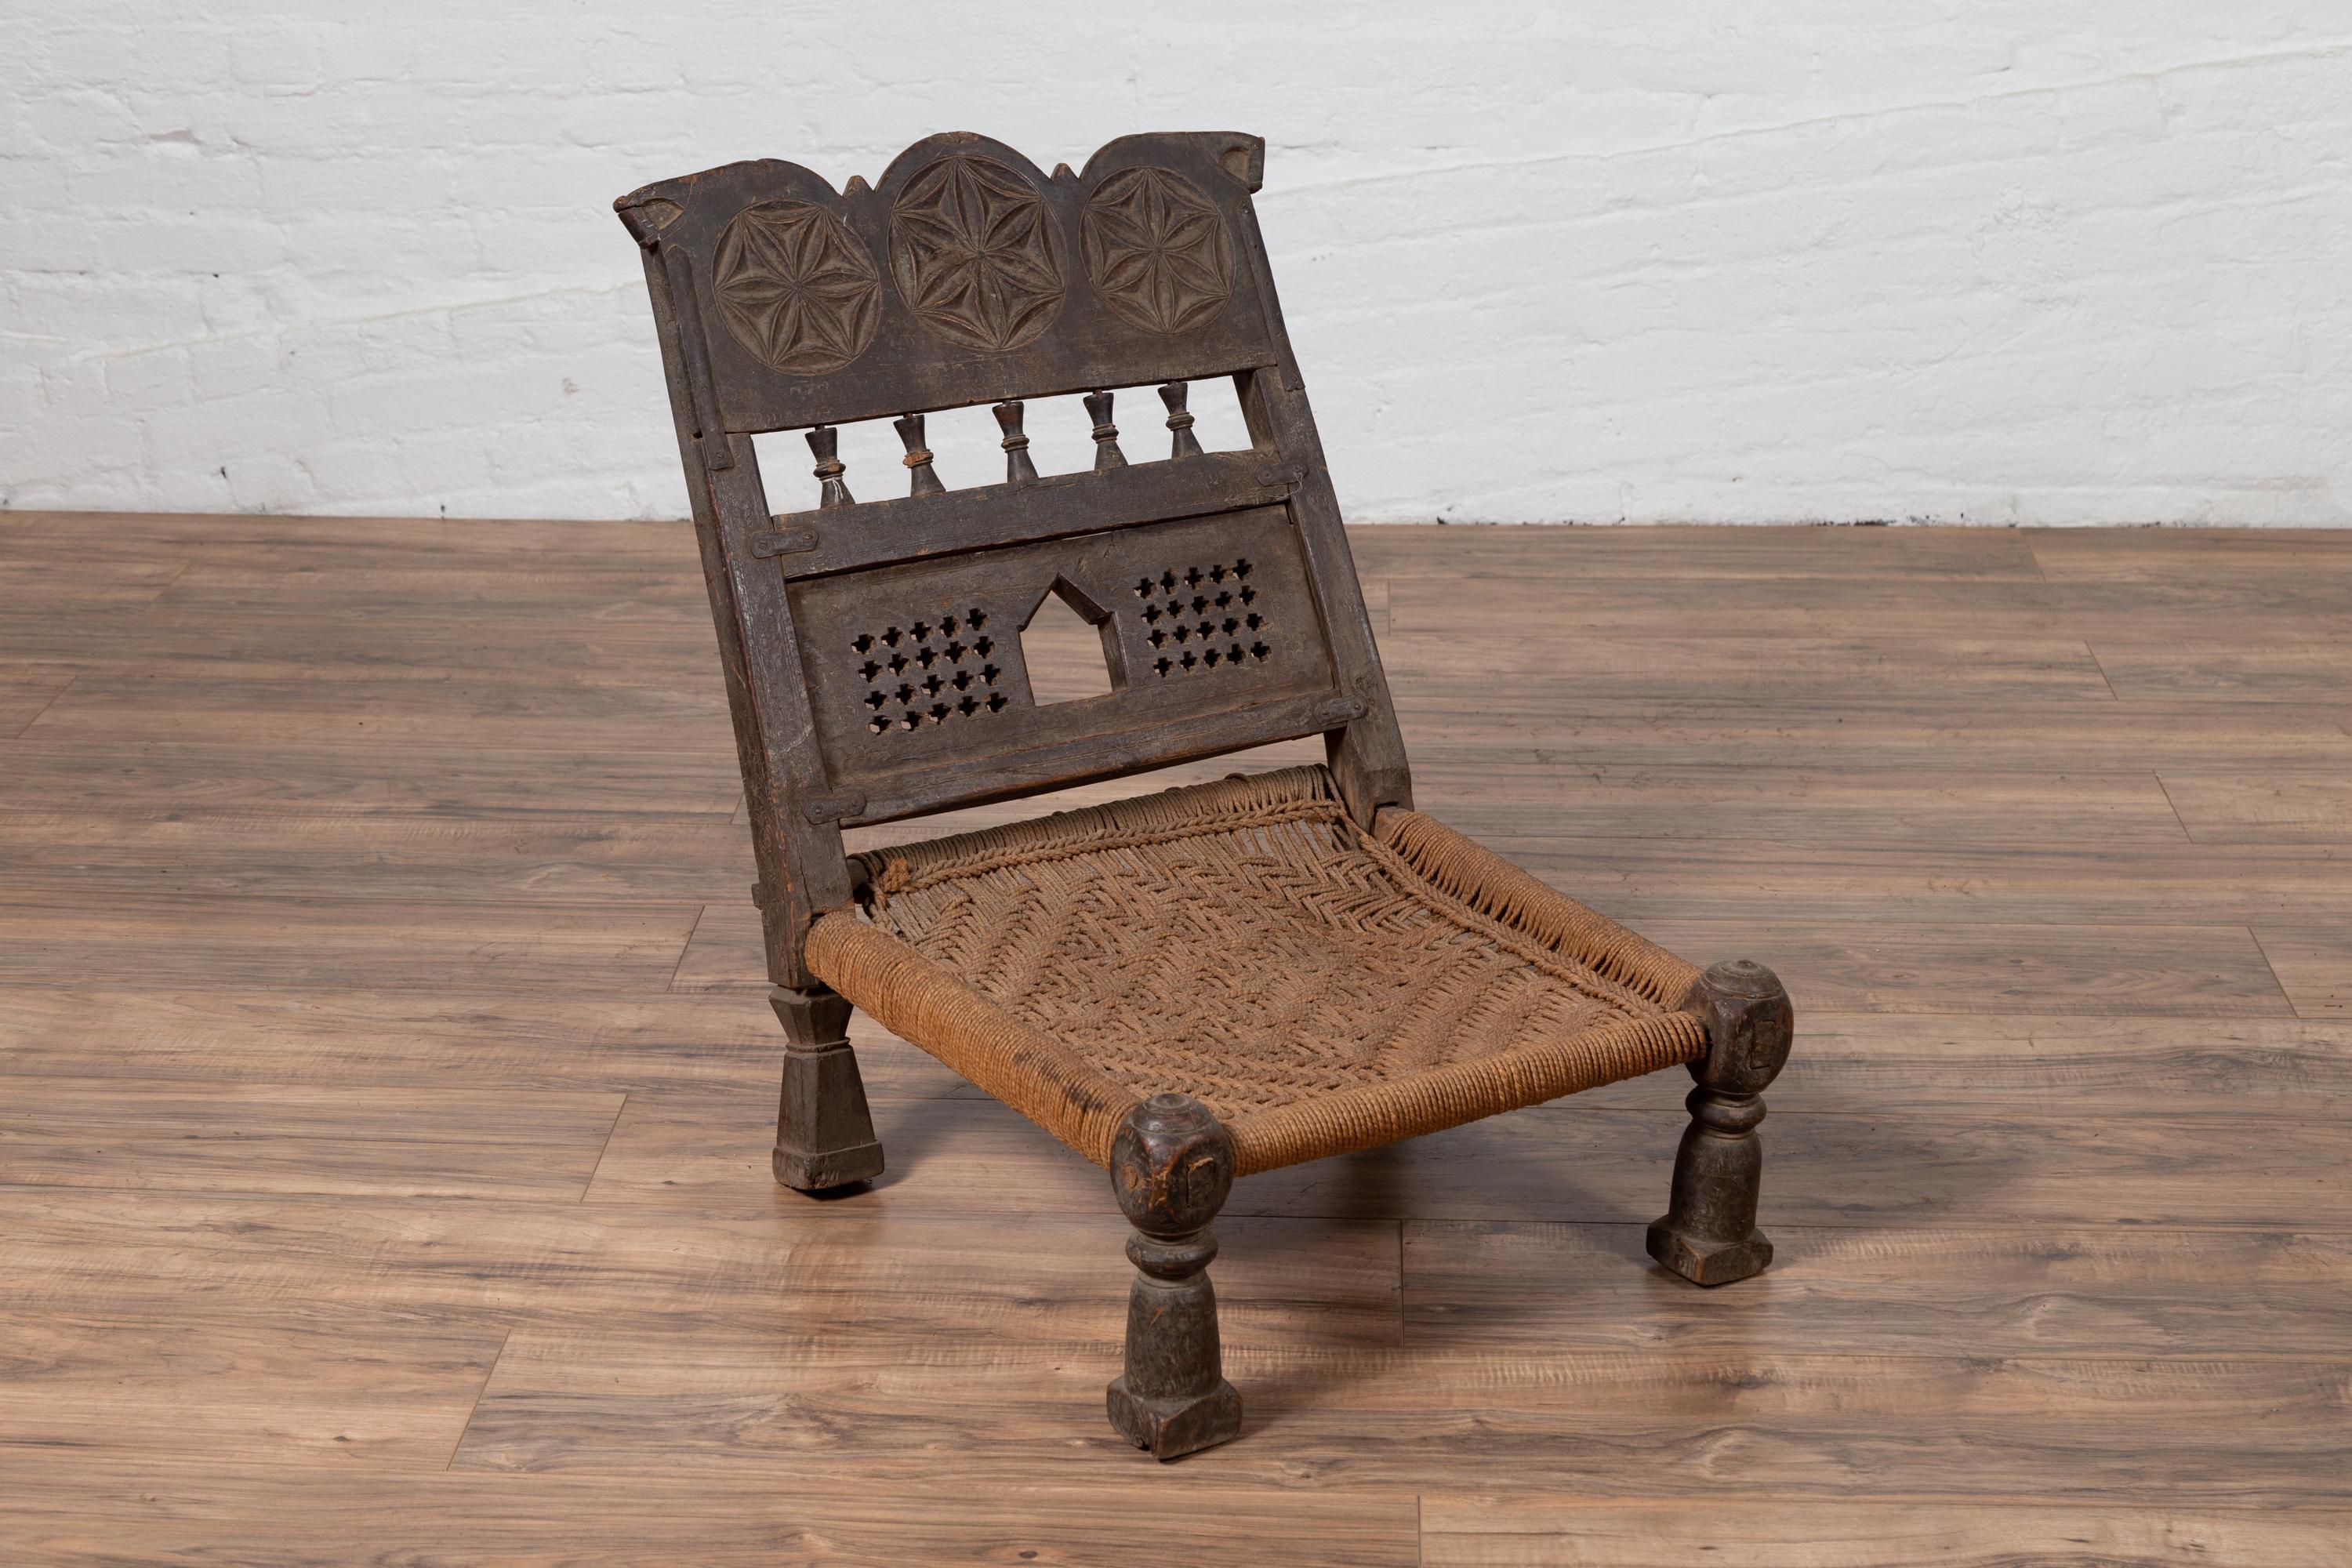 20th Century Indian Antique Rustic Low Seat Wooden Chair with Carved Rosettes and Rope Seat For Sale